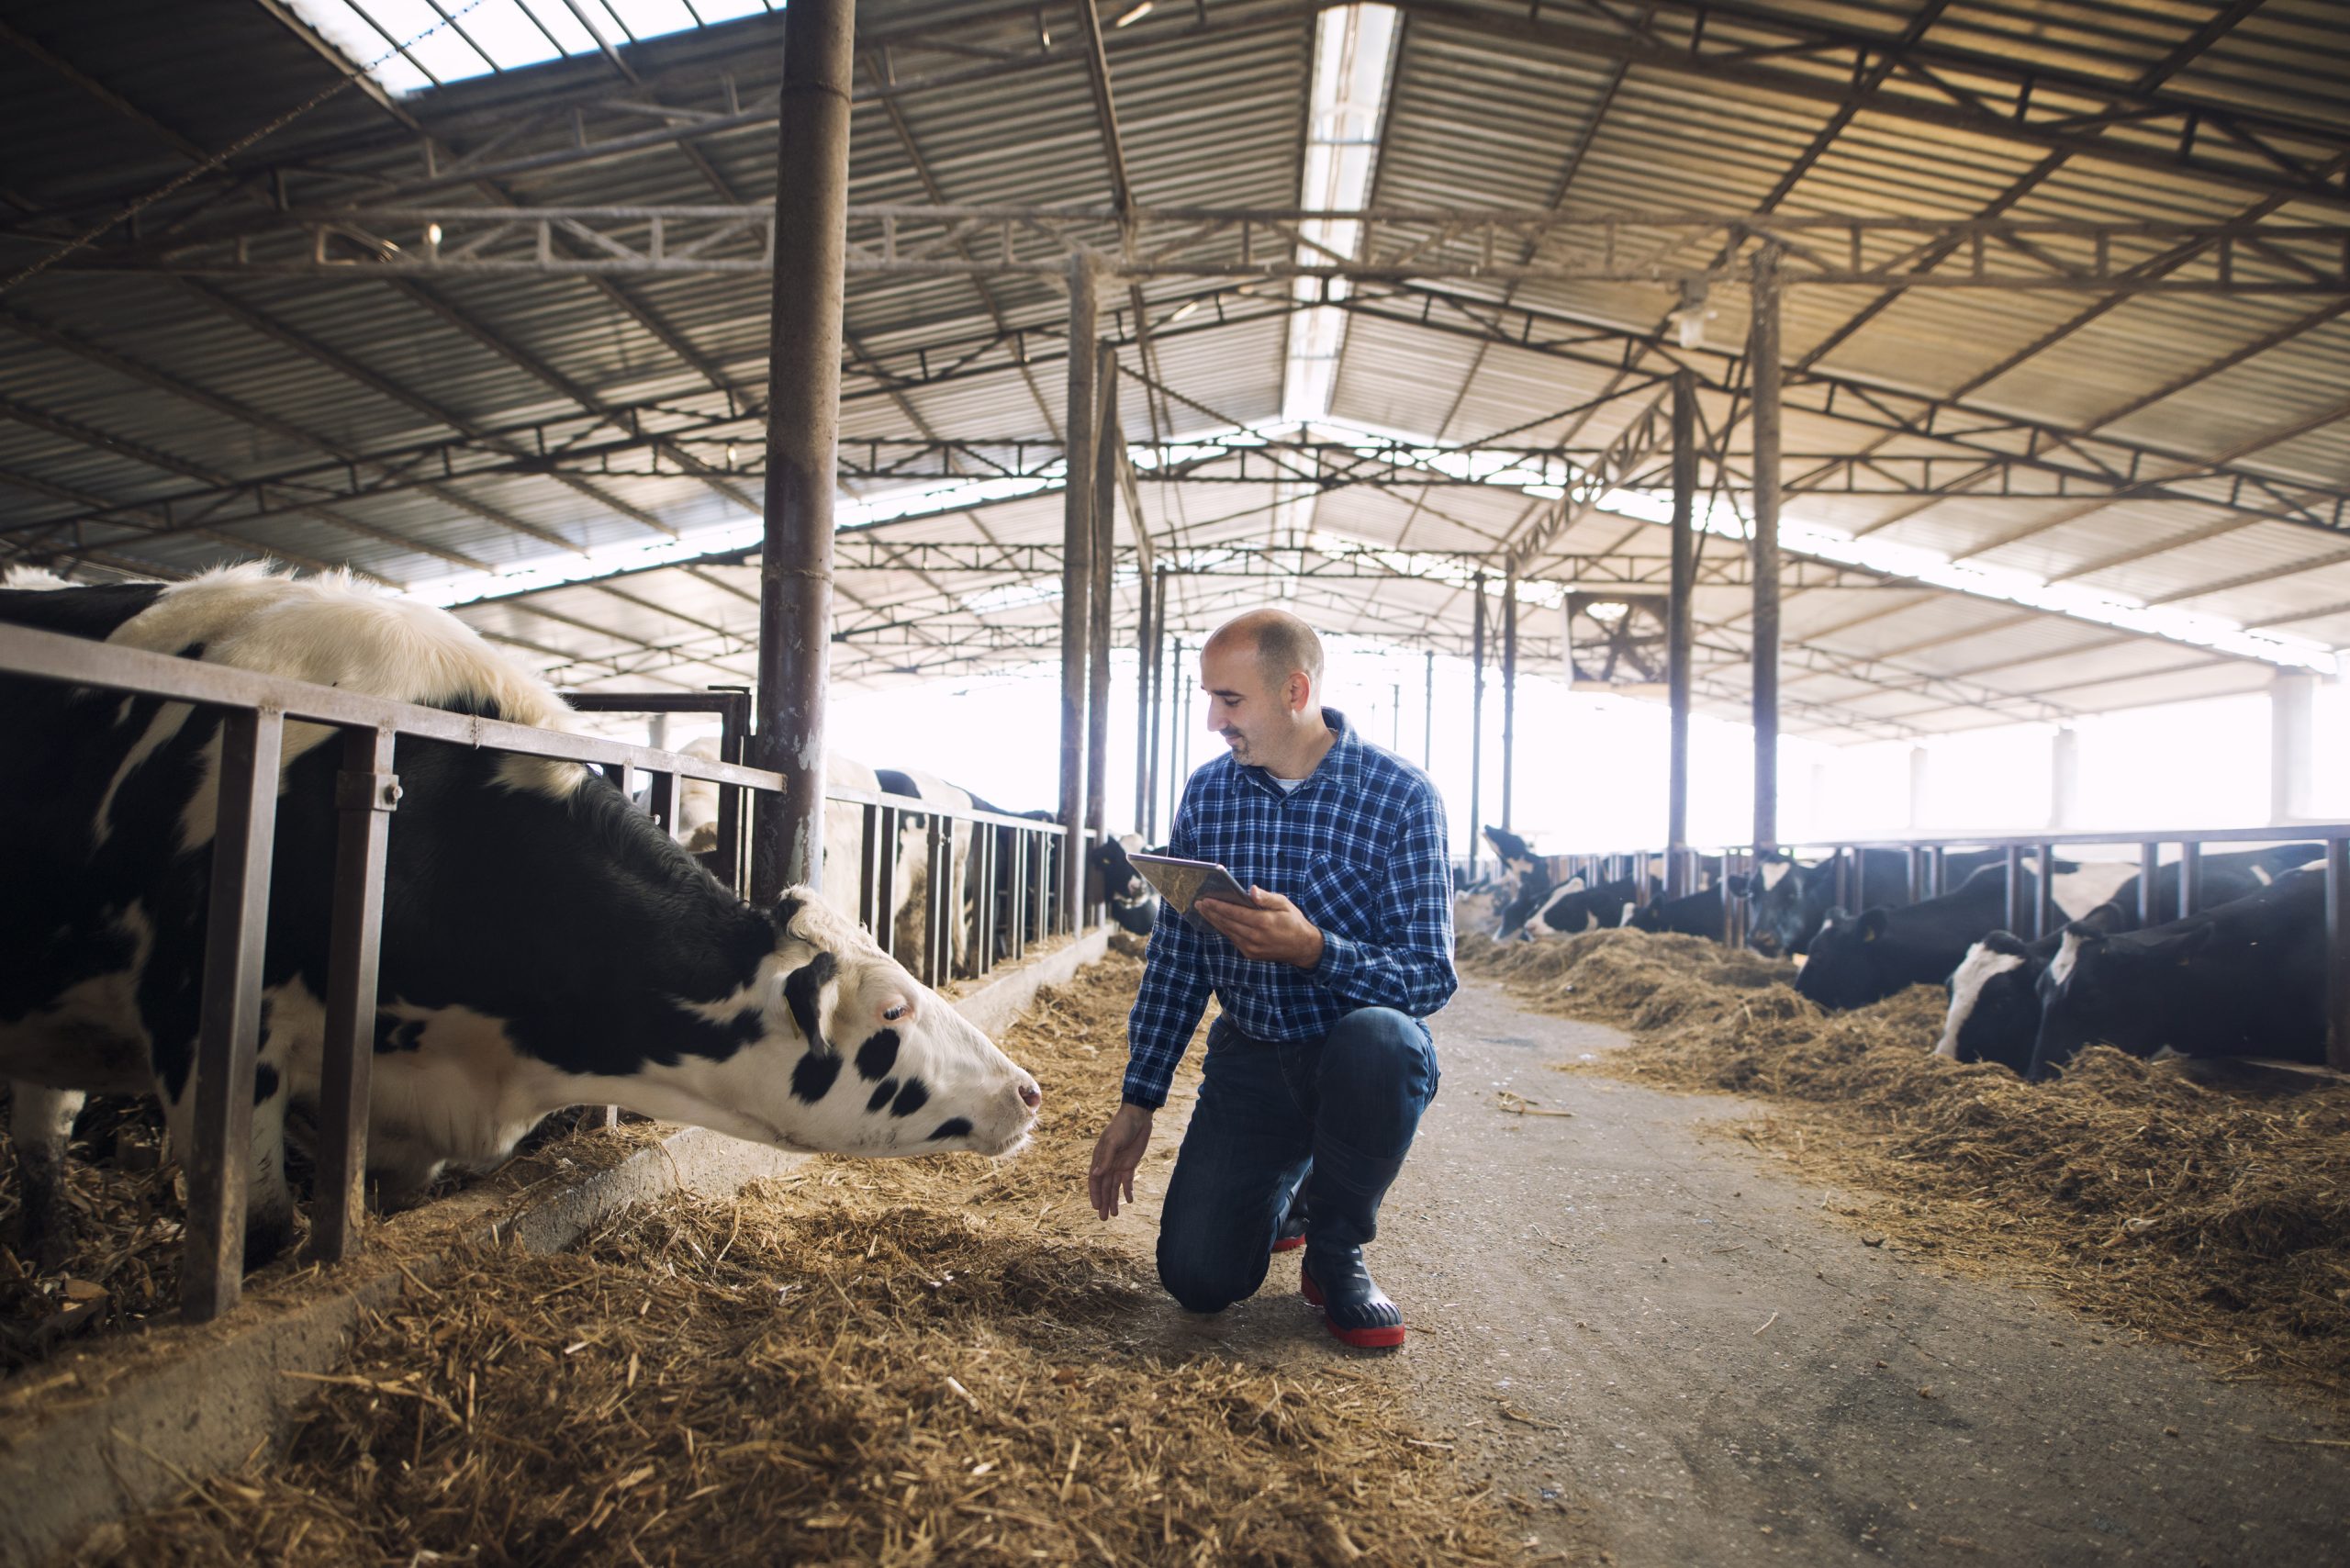 Farmer and cows at dairy farm. Cattleman holding tablet and observing domestic animals for milk production.